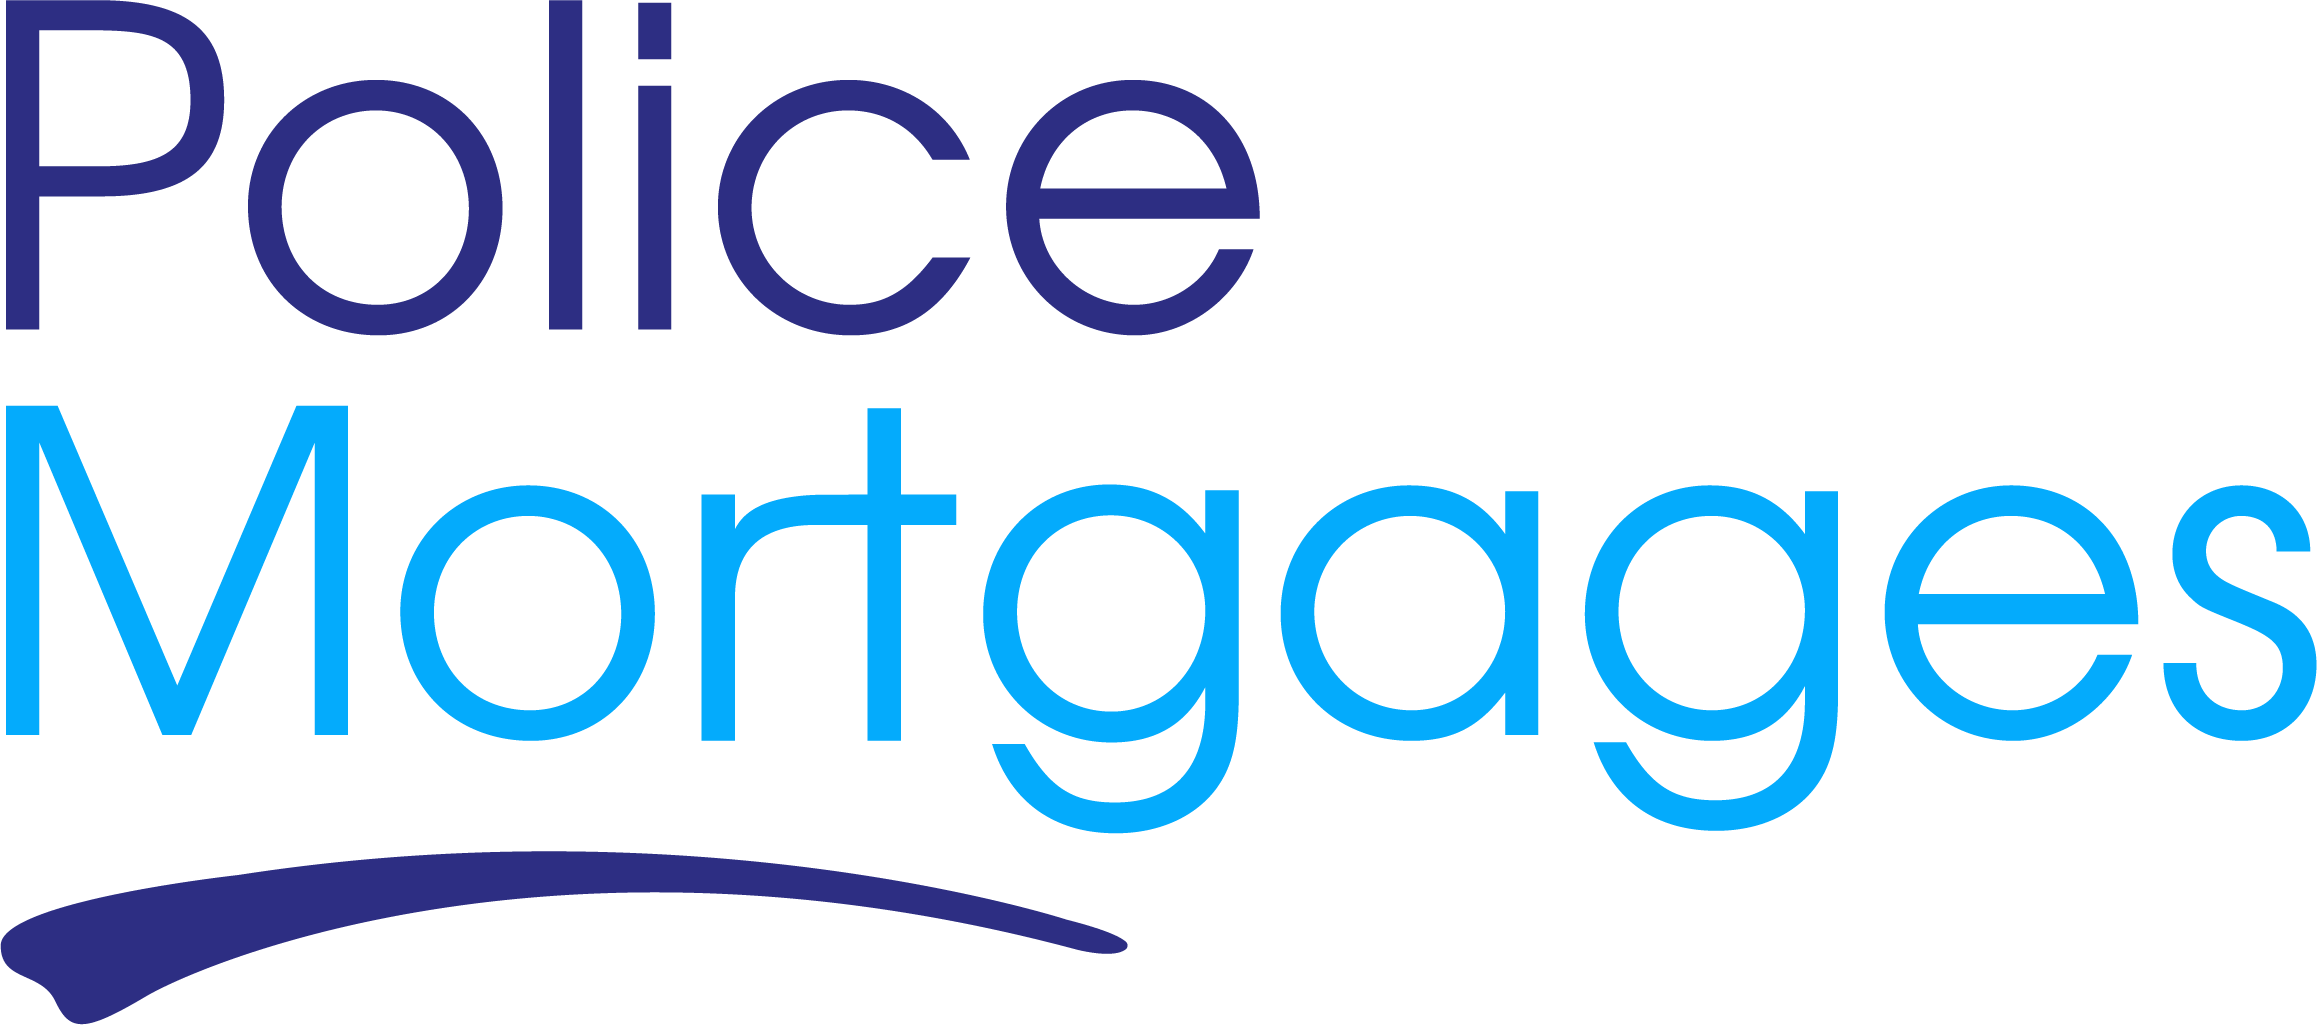 Police Mortgages